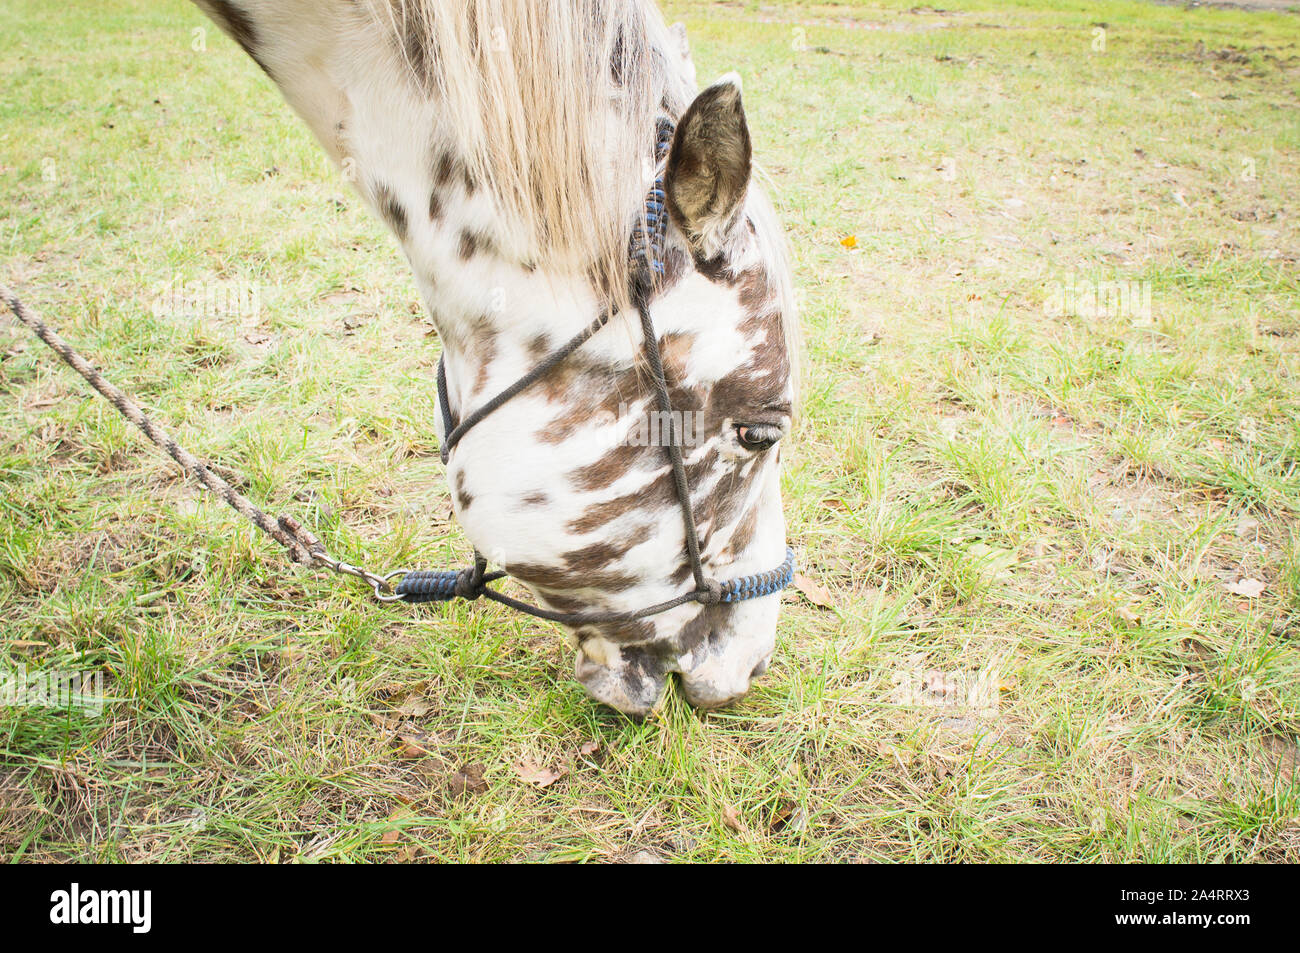 The Appaloosa, a horse breed best known for its colorful leopard-spotted coat pattern, is one of the most popular breeds in the United States as a sto Stock Photo